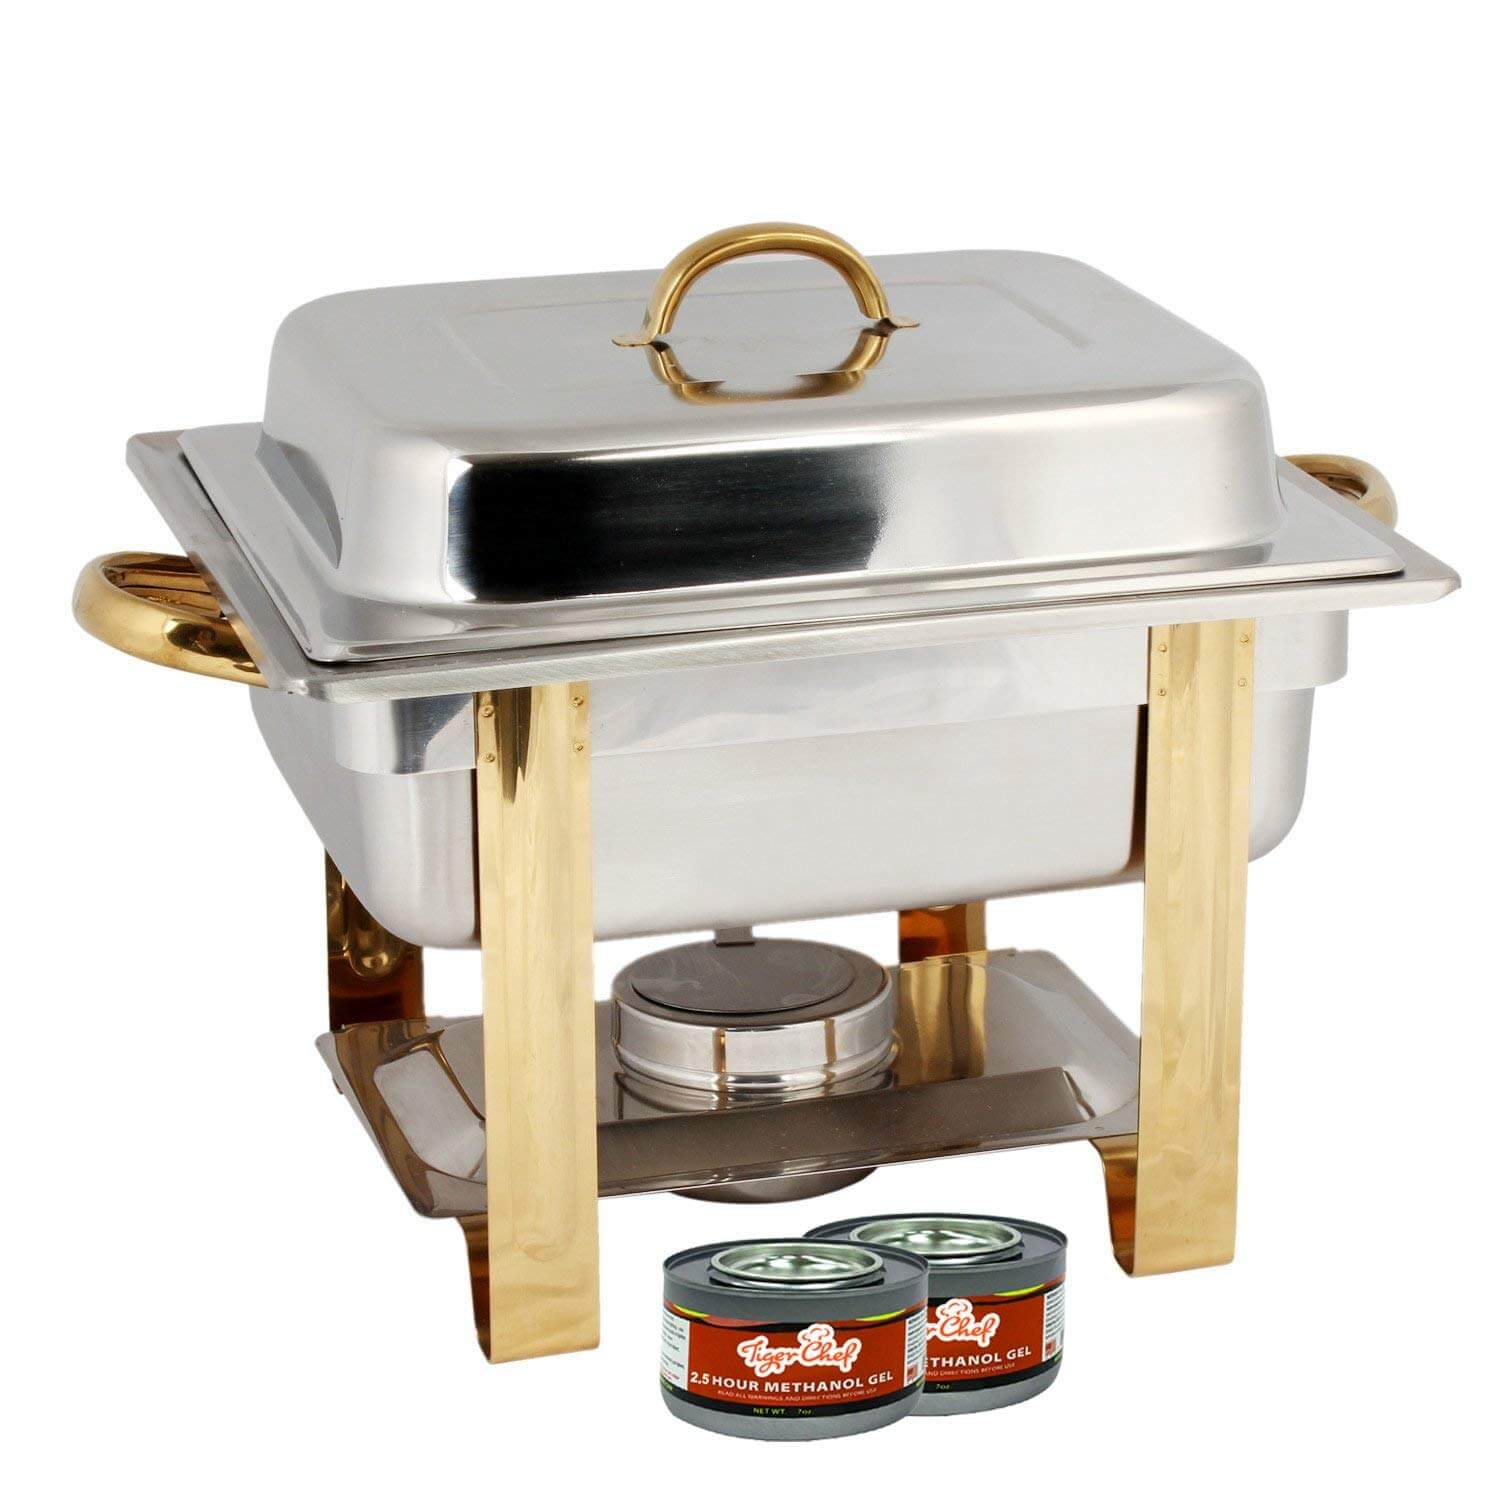 Tiger Chef 4 Quart Round Chafing Dish Buffet Warmer Set Includes Free Chafing Fuel Gel Cans Burns 2.5 Hours and Plastic Serving Tongs Gold Accented Chafer 